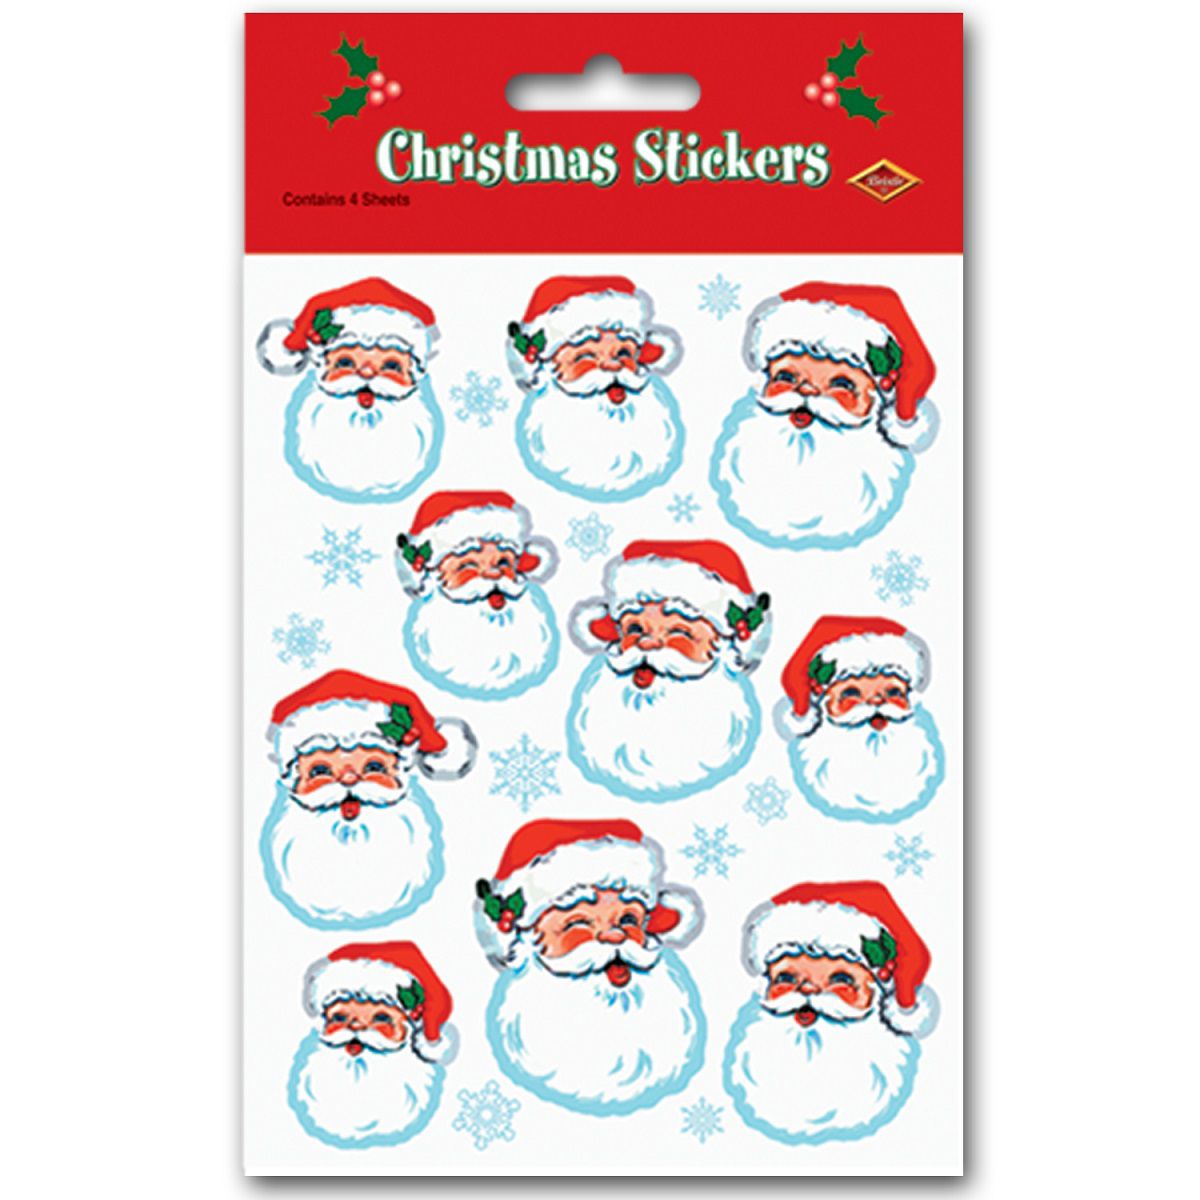 Big Dot of Happiness Jolly Santa Claus - Christmas Party White Elephant  Gift Exchange Game Scratch Off Cards - 22 Count